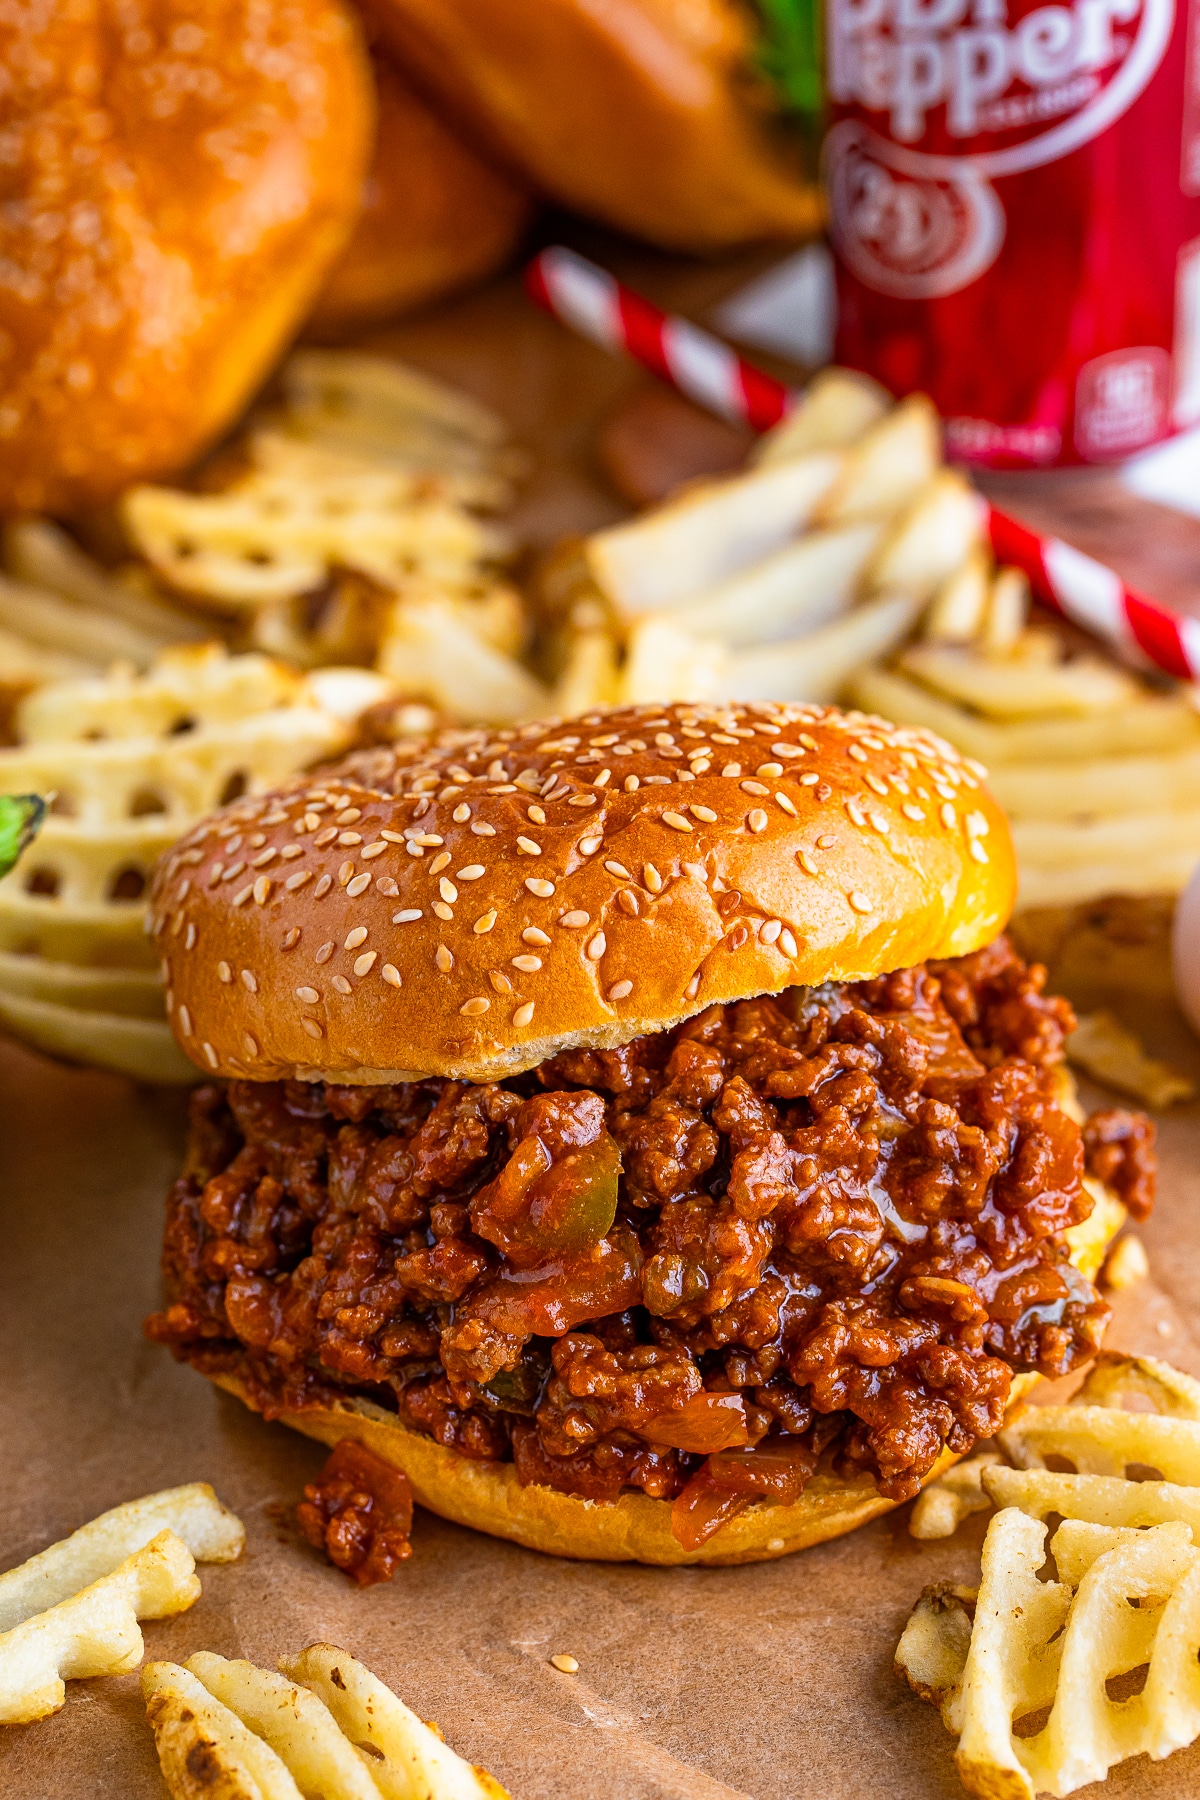 sloppy joes recipe on parchment paper surrounded by fries